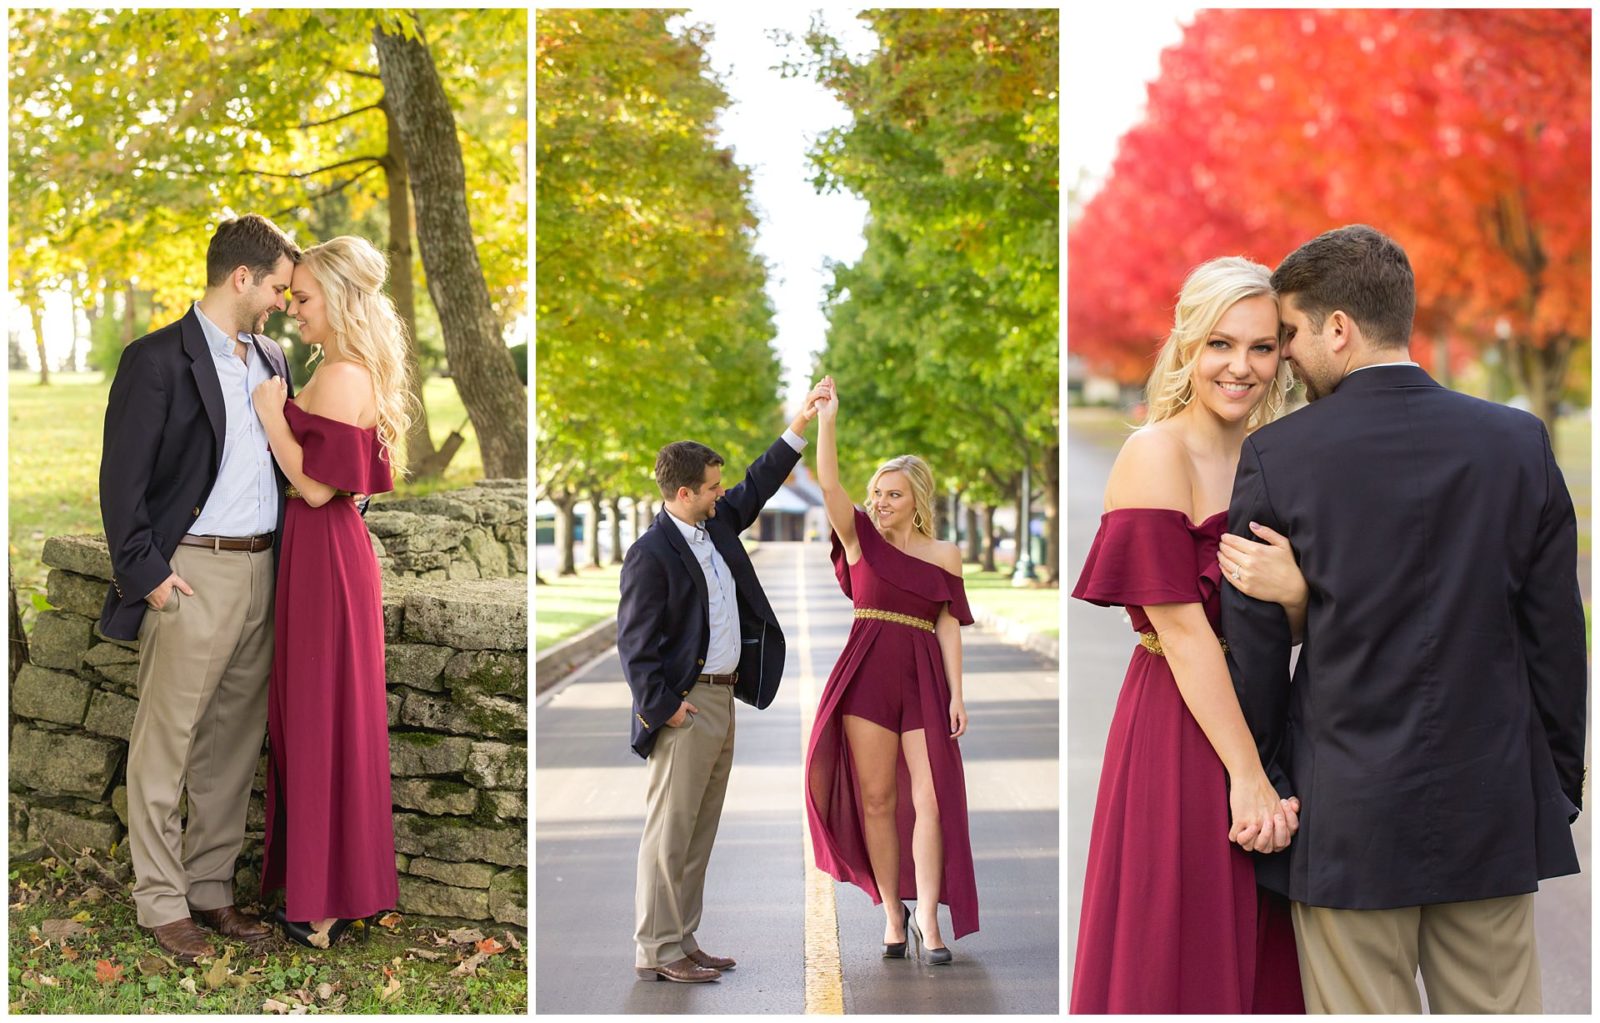 Fall Engagement Session at Keeneland Racecourse in Lexington, KY